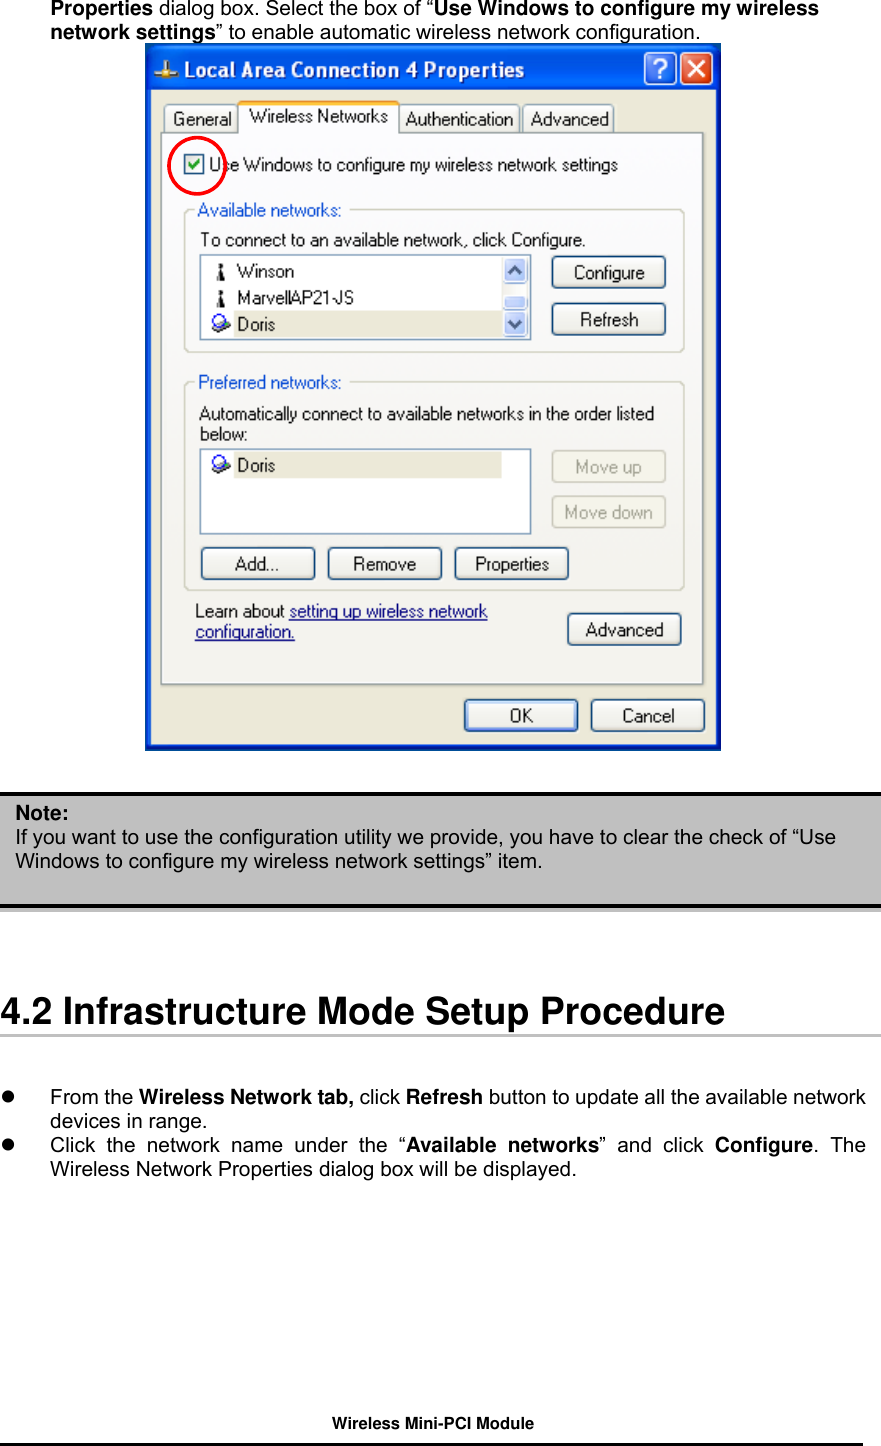 Wireless Mini-PCI Module    Properties dialog box. Select the box of “Use Windows to configure my wireless network settings” to enable automatic wireless network configuration.              4.2 Infrastructure Mode Setup Procedure     From the Wireless Network tab, click Refresh button to update all the available network devices in range.     Click the network name under the “Available networks” and click Configure. The Wireless Network Properties dialog box will be displayed.  Note: If you want to use the configuration utility we provide, you have to clear the check of “Use Windows to configure my wireless network settings” item. 